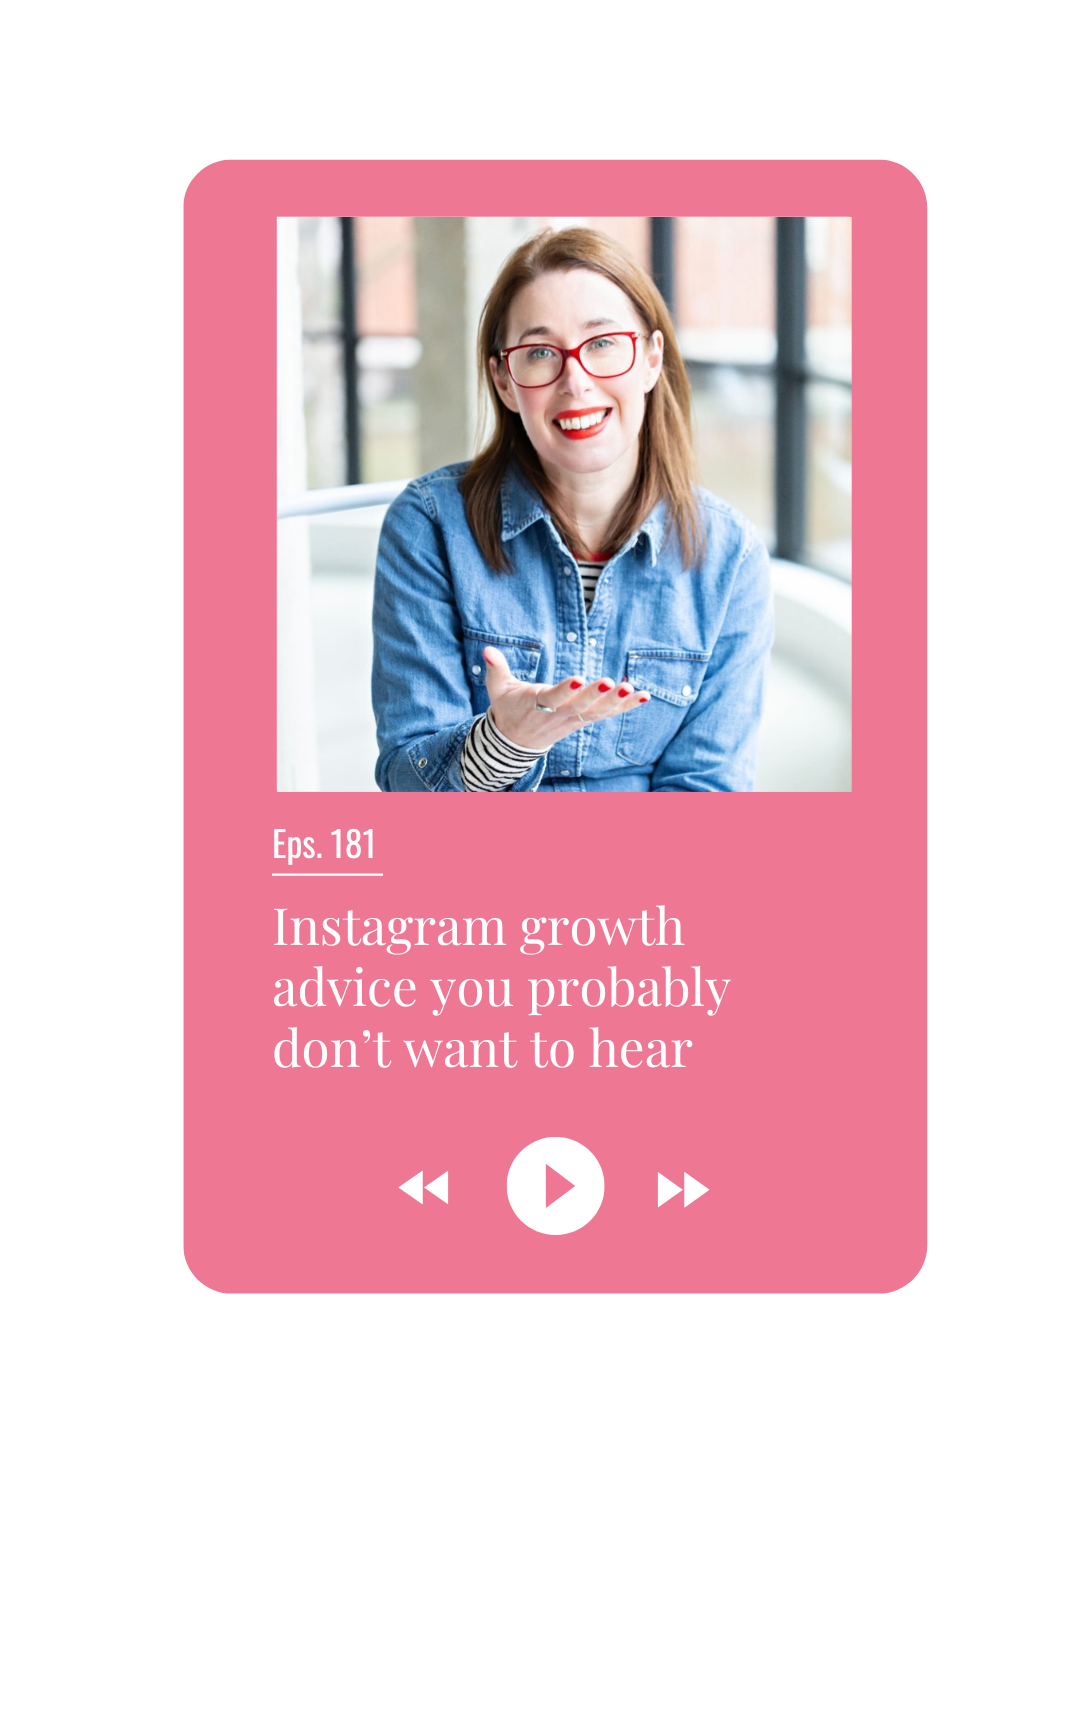 Instagram growth advice you probably don’t want to hear